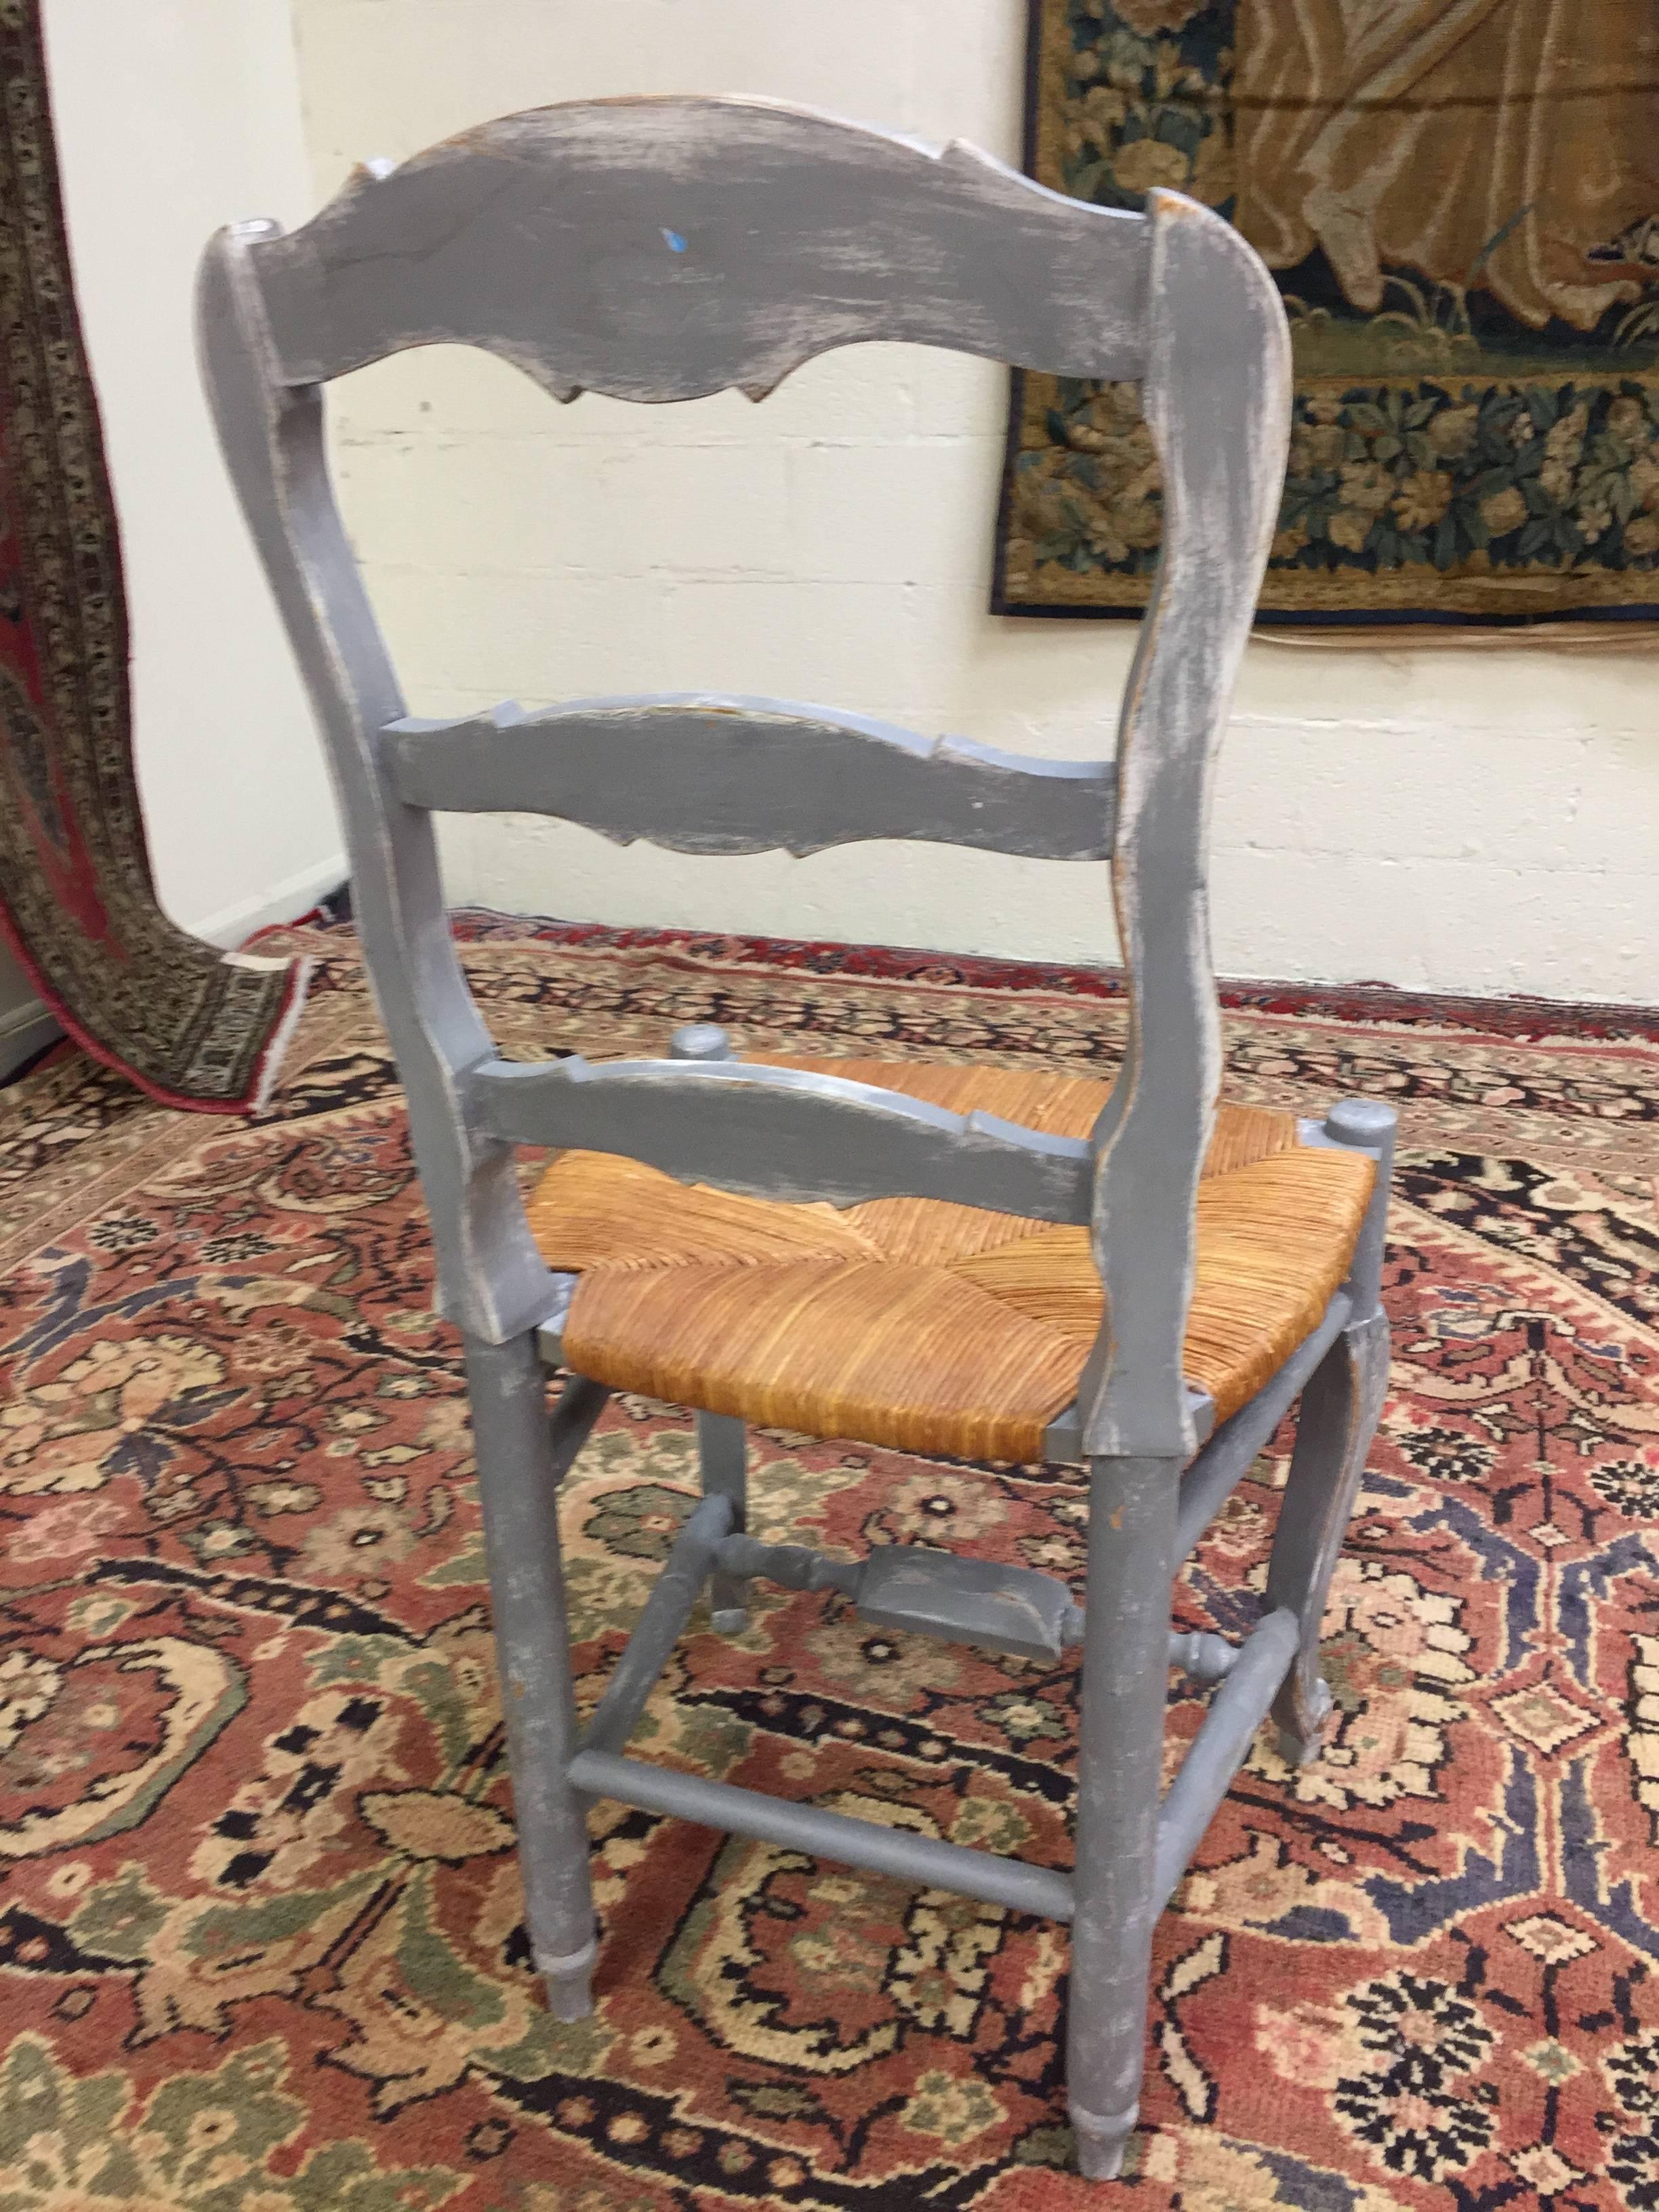 Set of six painted French Provençal chairs (gray in color with white undertones). From floor to top of the seat is 18.75 inches.